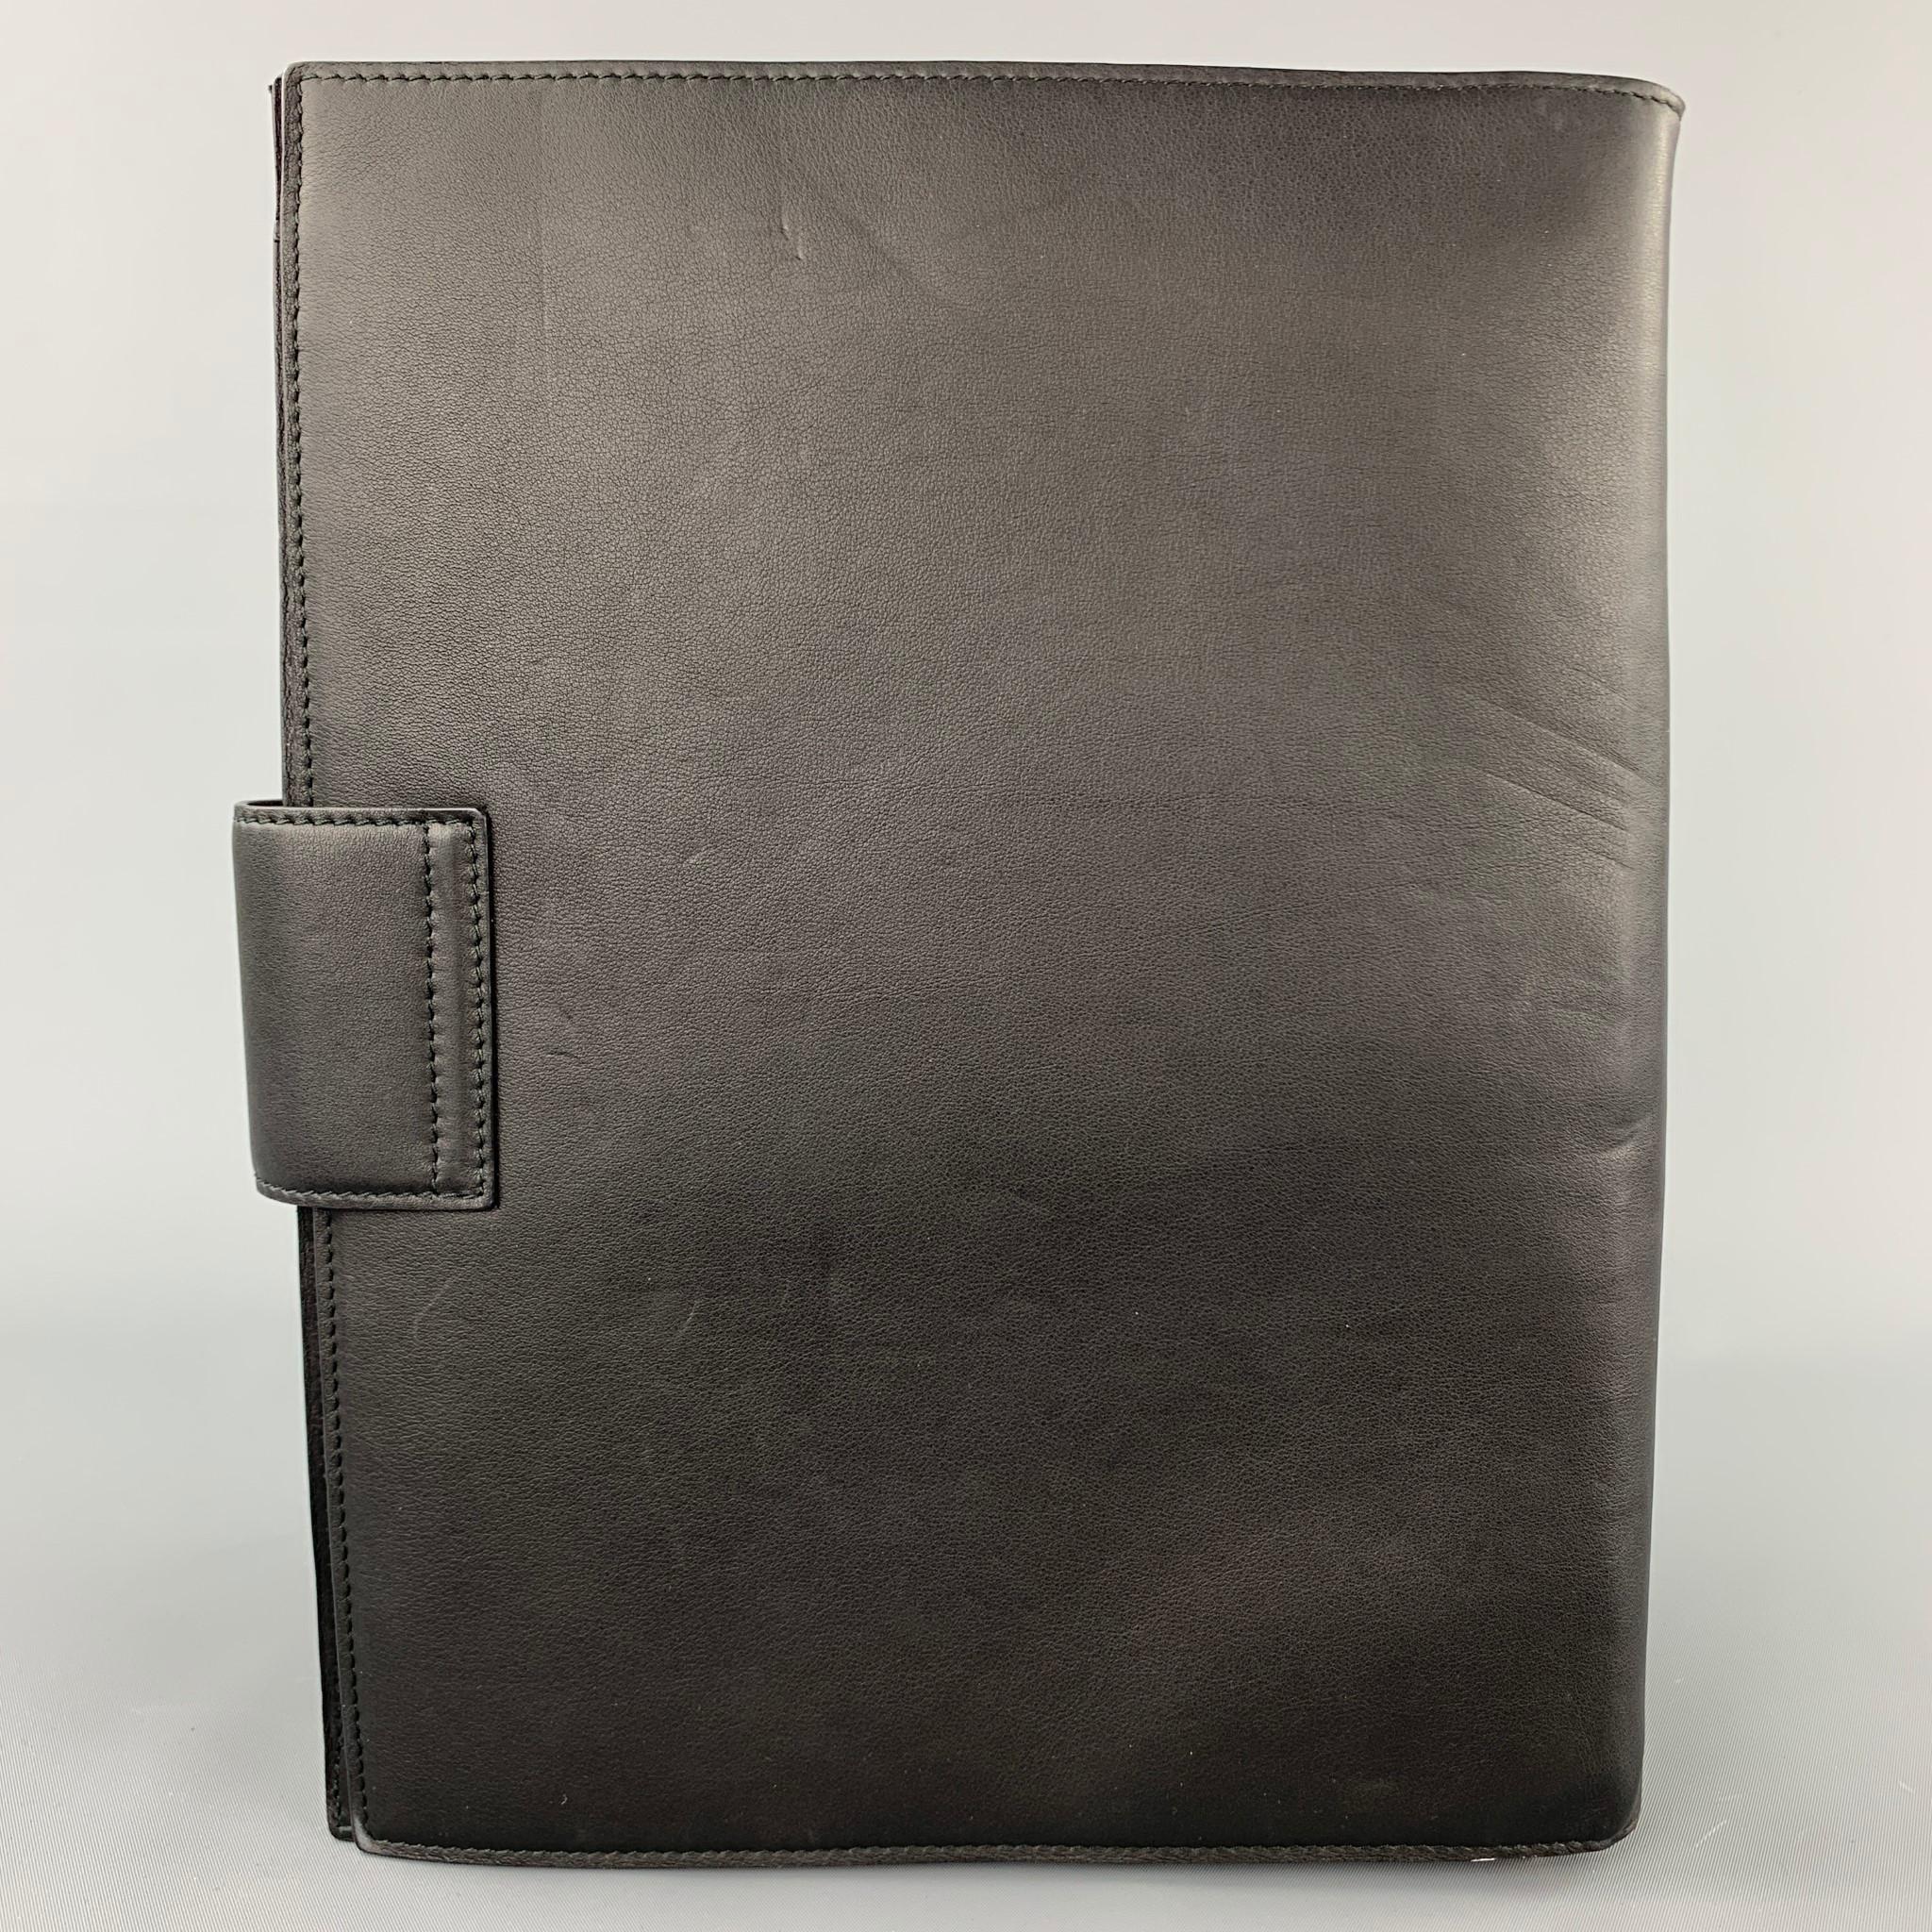 BALLY A/W 11 briefcase comes in a black leather featuring a removable shoulder strap, inner slots, and a push on closure. 

Very Good Pre-Owned Condition.
Original Retail Price: $670.00

Measurements:

Length: 9.5 in.
Height: 12 in.
Drop: 22 in. 